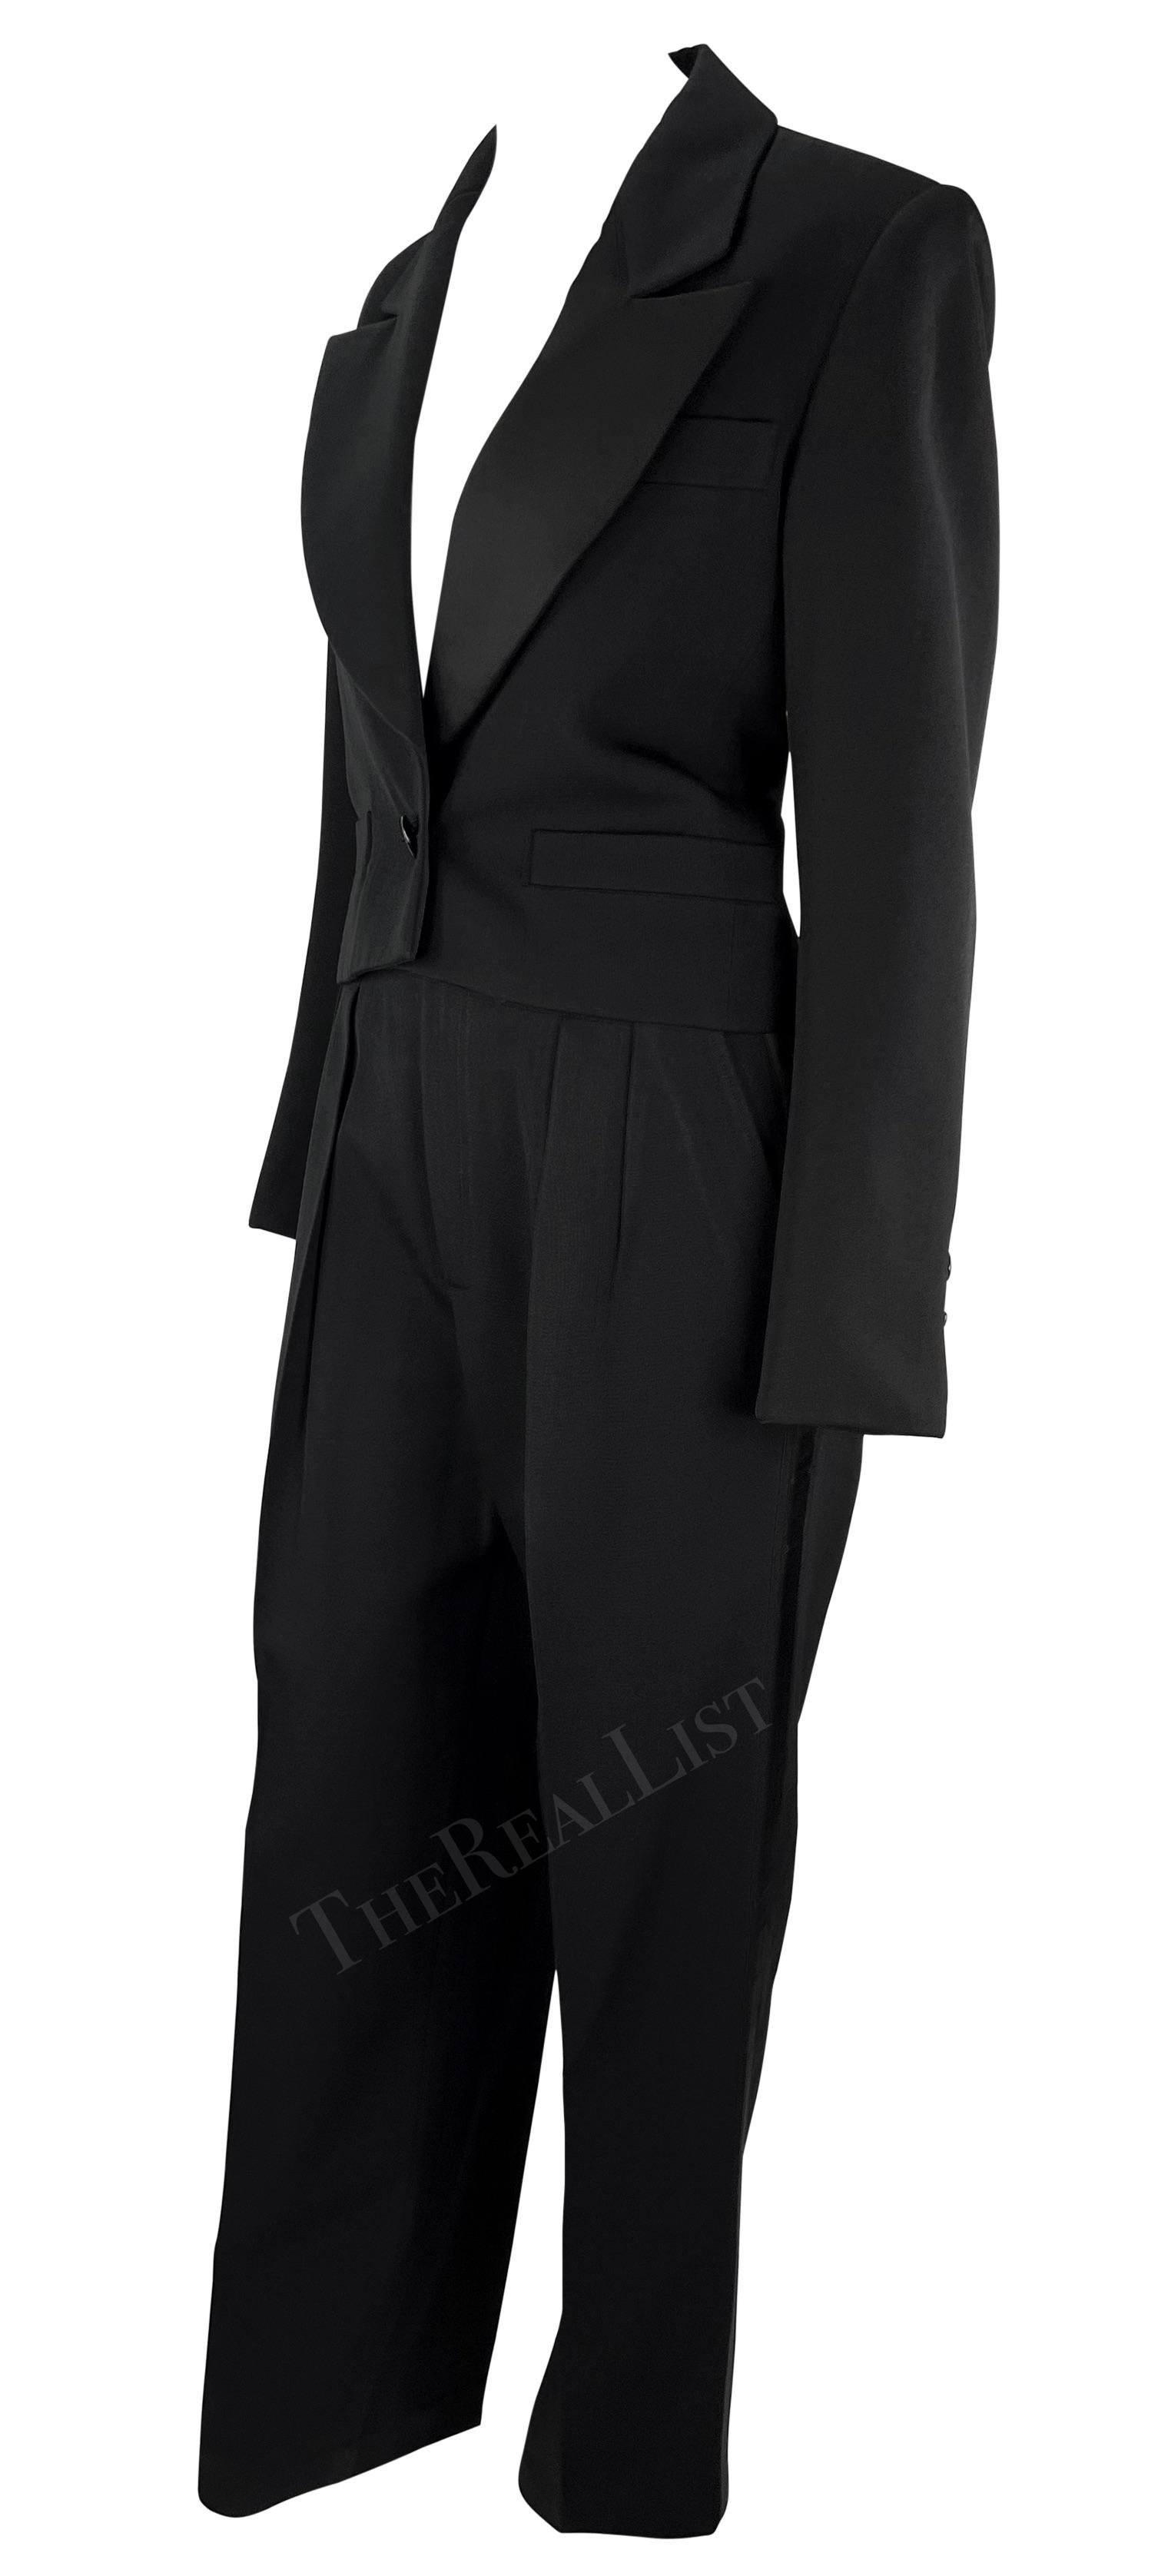 1980s Saint Laurent Rive Gauche Cropped Le Smoking Tuxedo Satin Black Pantsuit In Excellent Condition For Sale In West Hollywood, CA